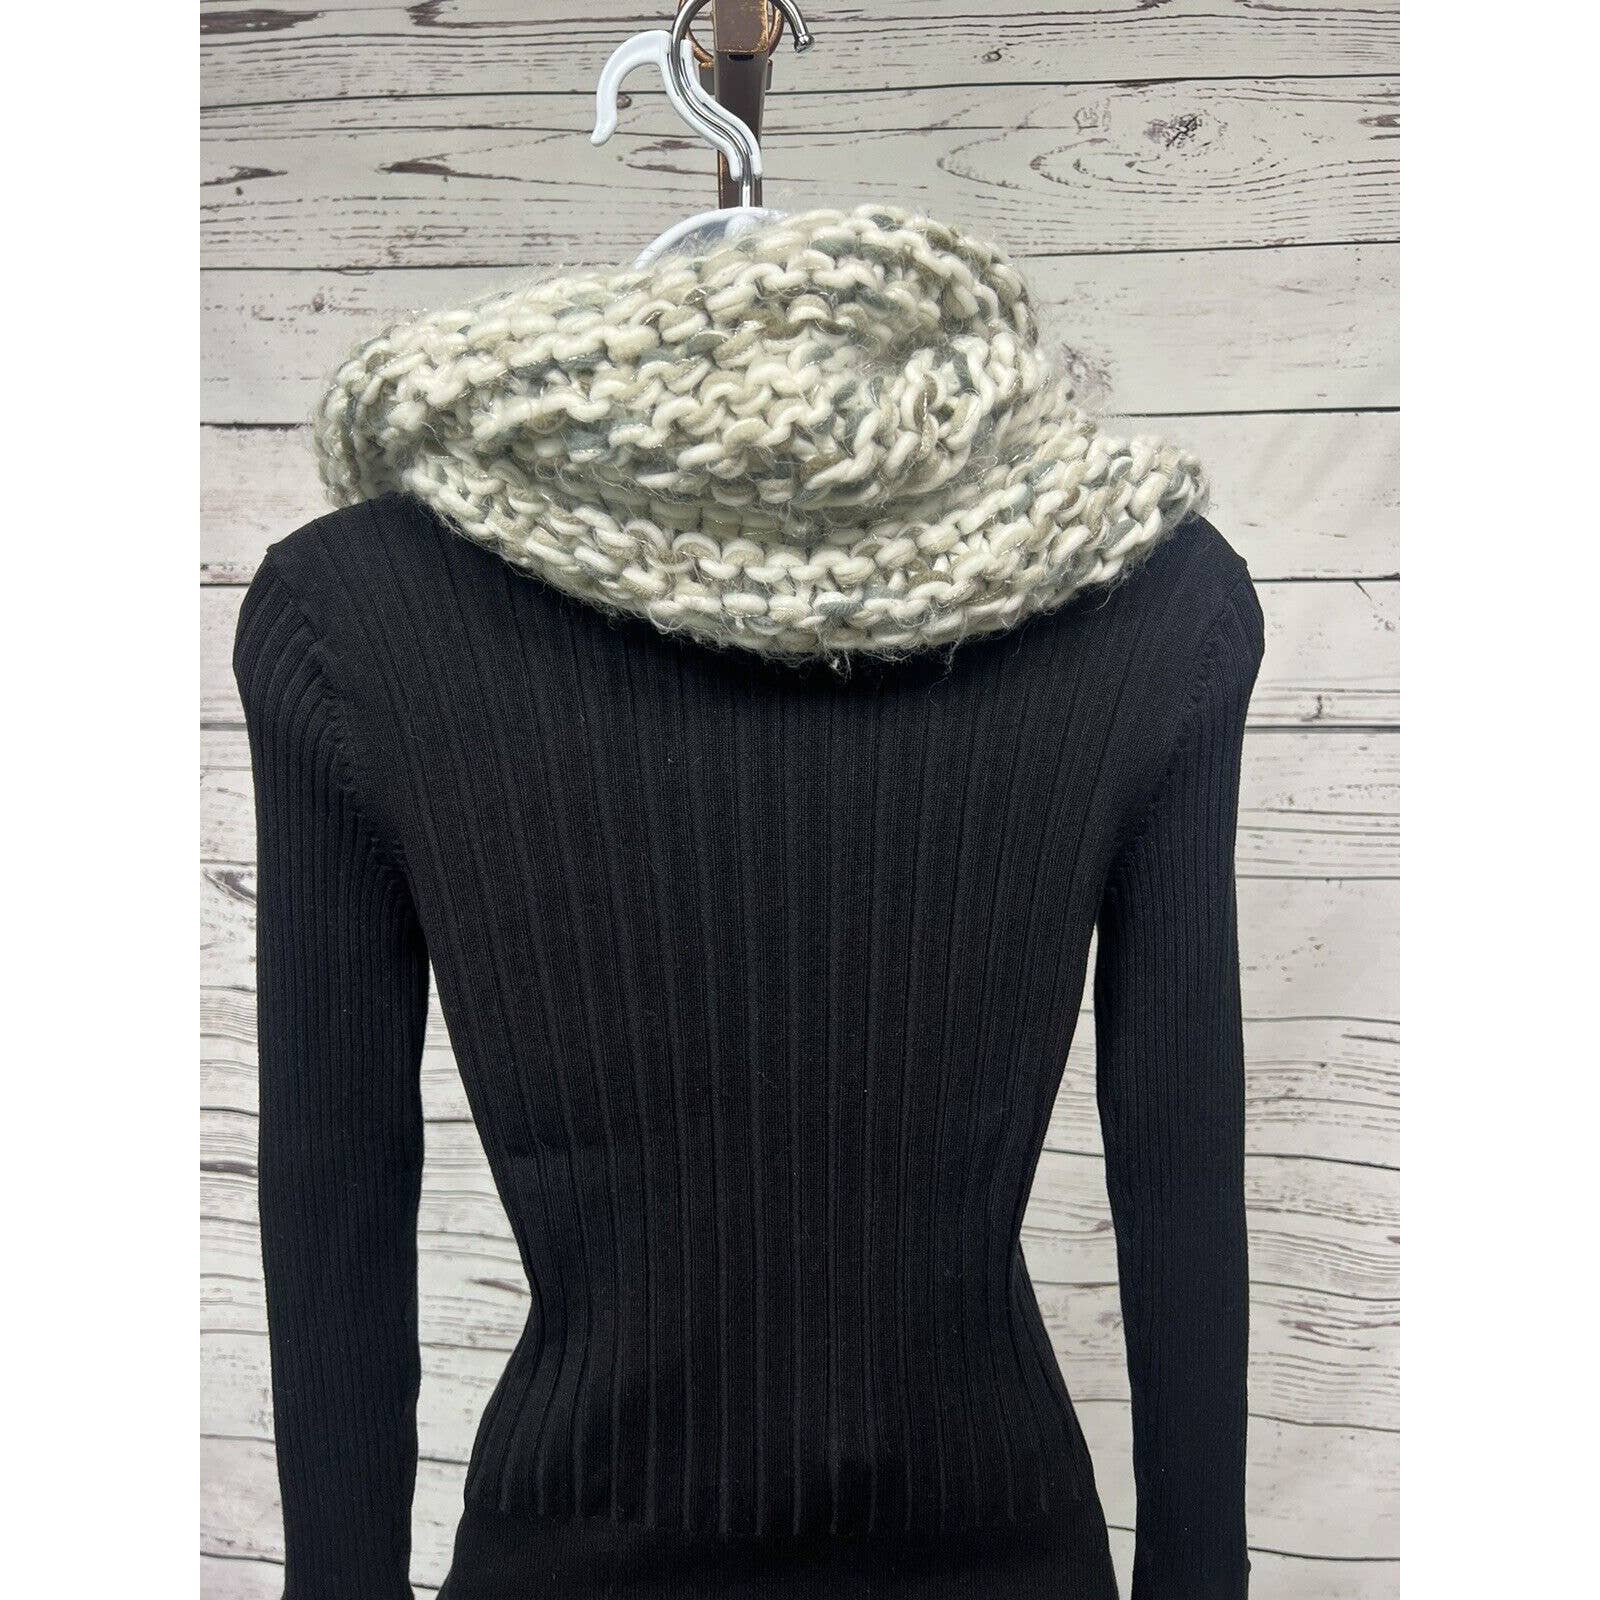 Fossil Infinity Scarf Off White Gray Taupe with Silver Accent Thread Acrylic